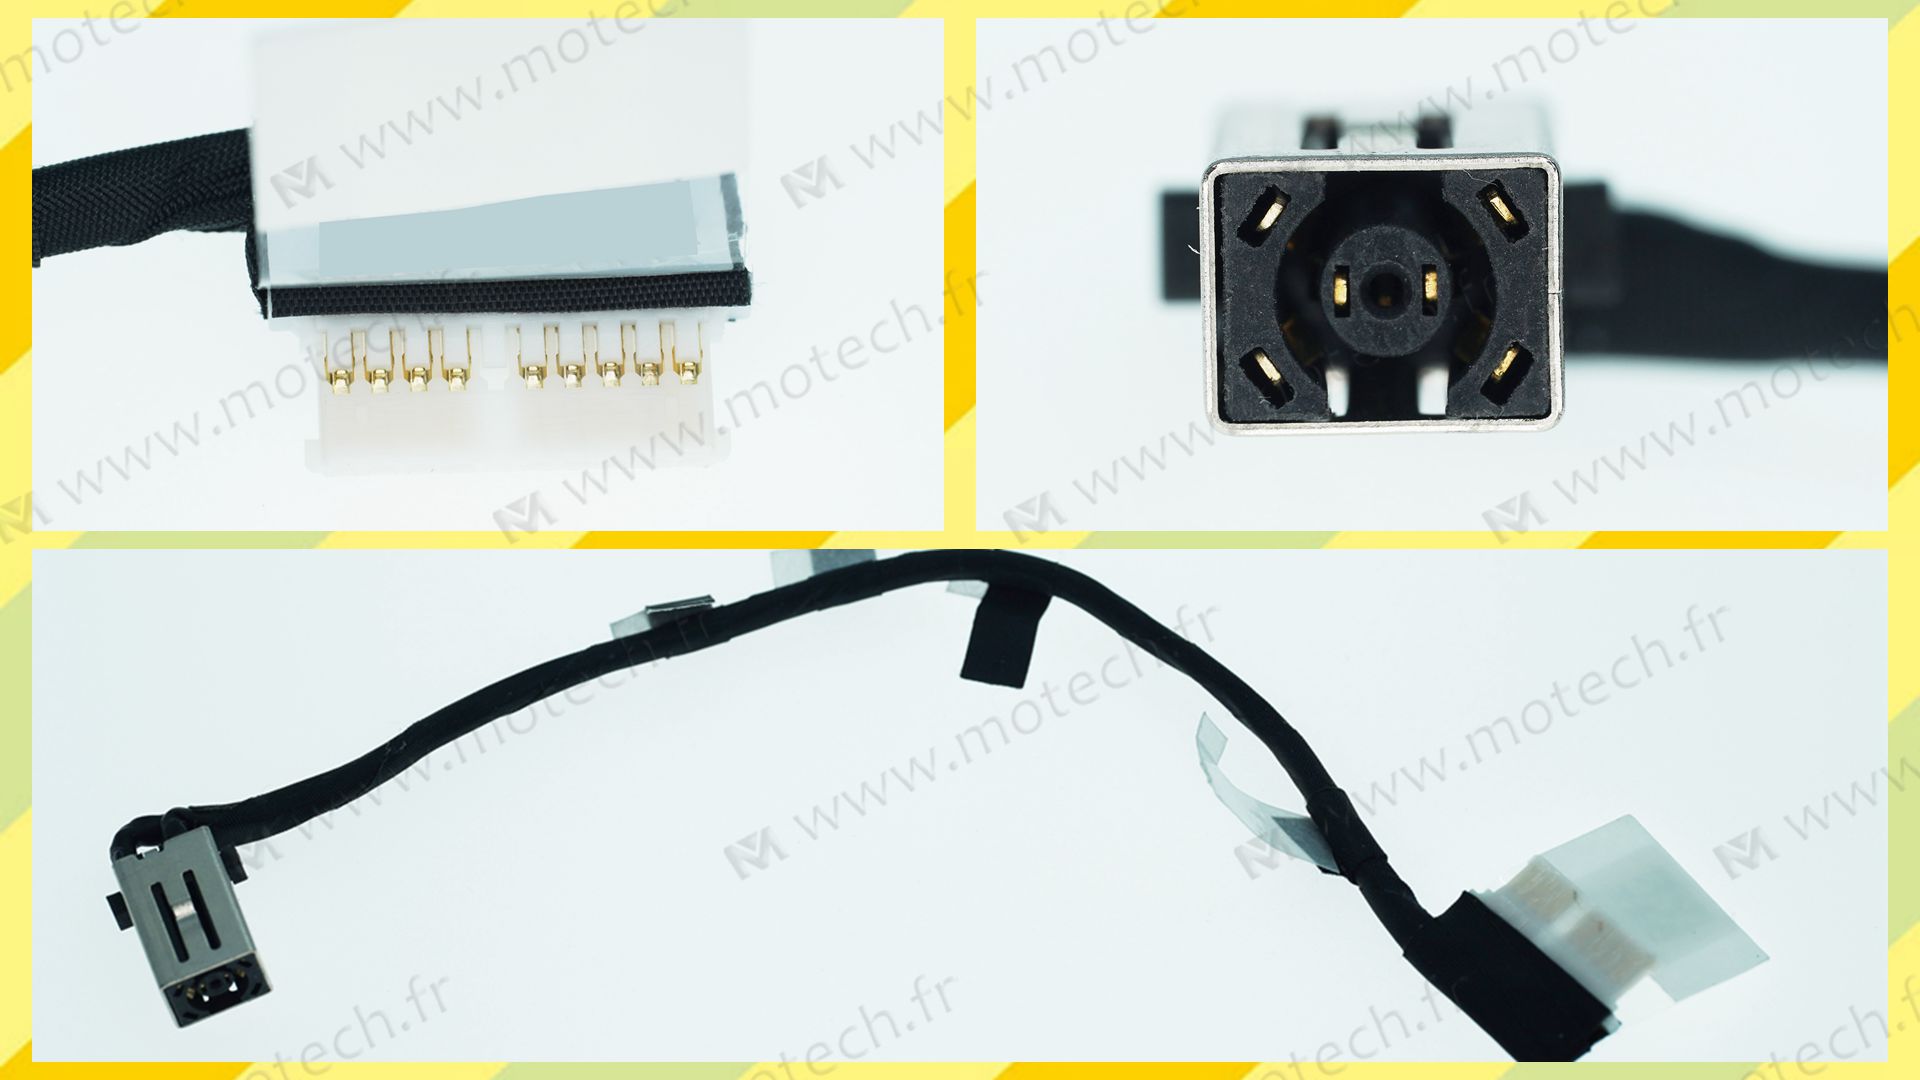 Dell 7610 inspiron charging connector, Dell 7610 inspiron DC Power Jack, Dell 7610 inspiron DC IN Cable, Dell 7610 inspiron Power Jack, Dell 7610 inspiron plug, Dell 7610 inspiron Jack socket, Dell 7610 inspiron connecteur de charge, 